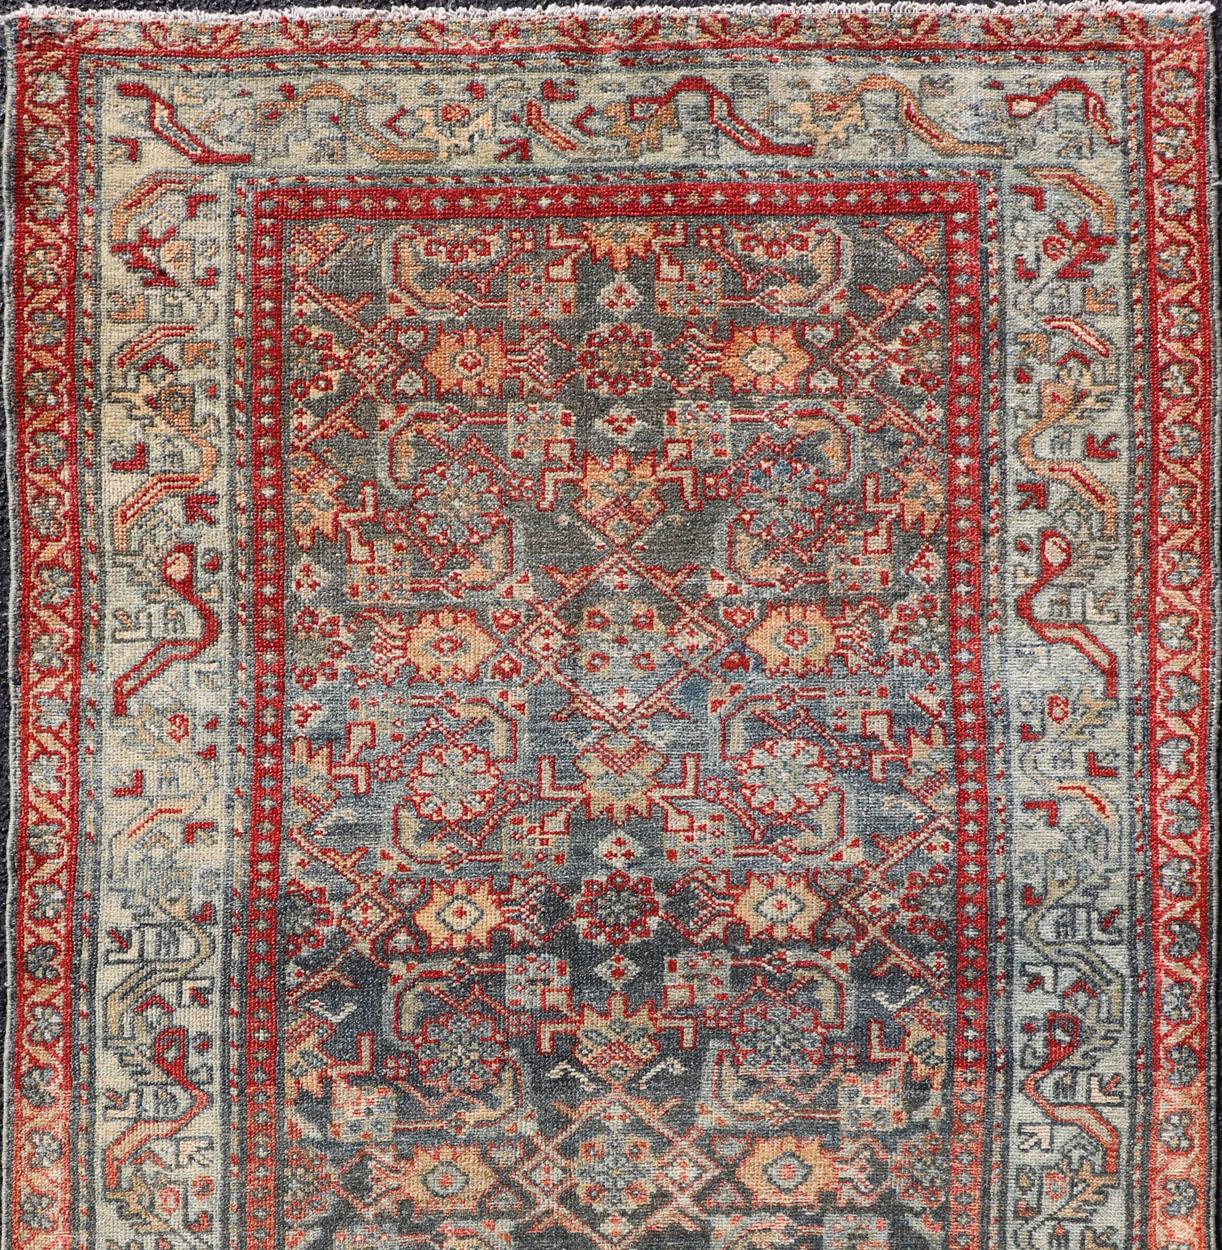 Antique Persian Malayer rug with colorful geometric design in gray, blue and red, rug EN-137, country of origin / type: Iran / Malayer, circa 1910.

This antique Persian Malayer rug (circa early 20th century) features a unique blend of colors and